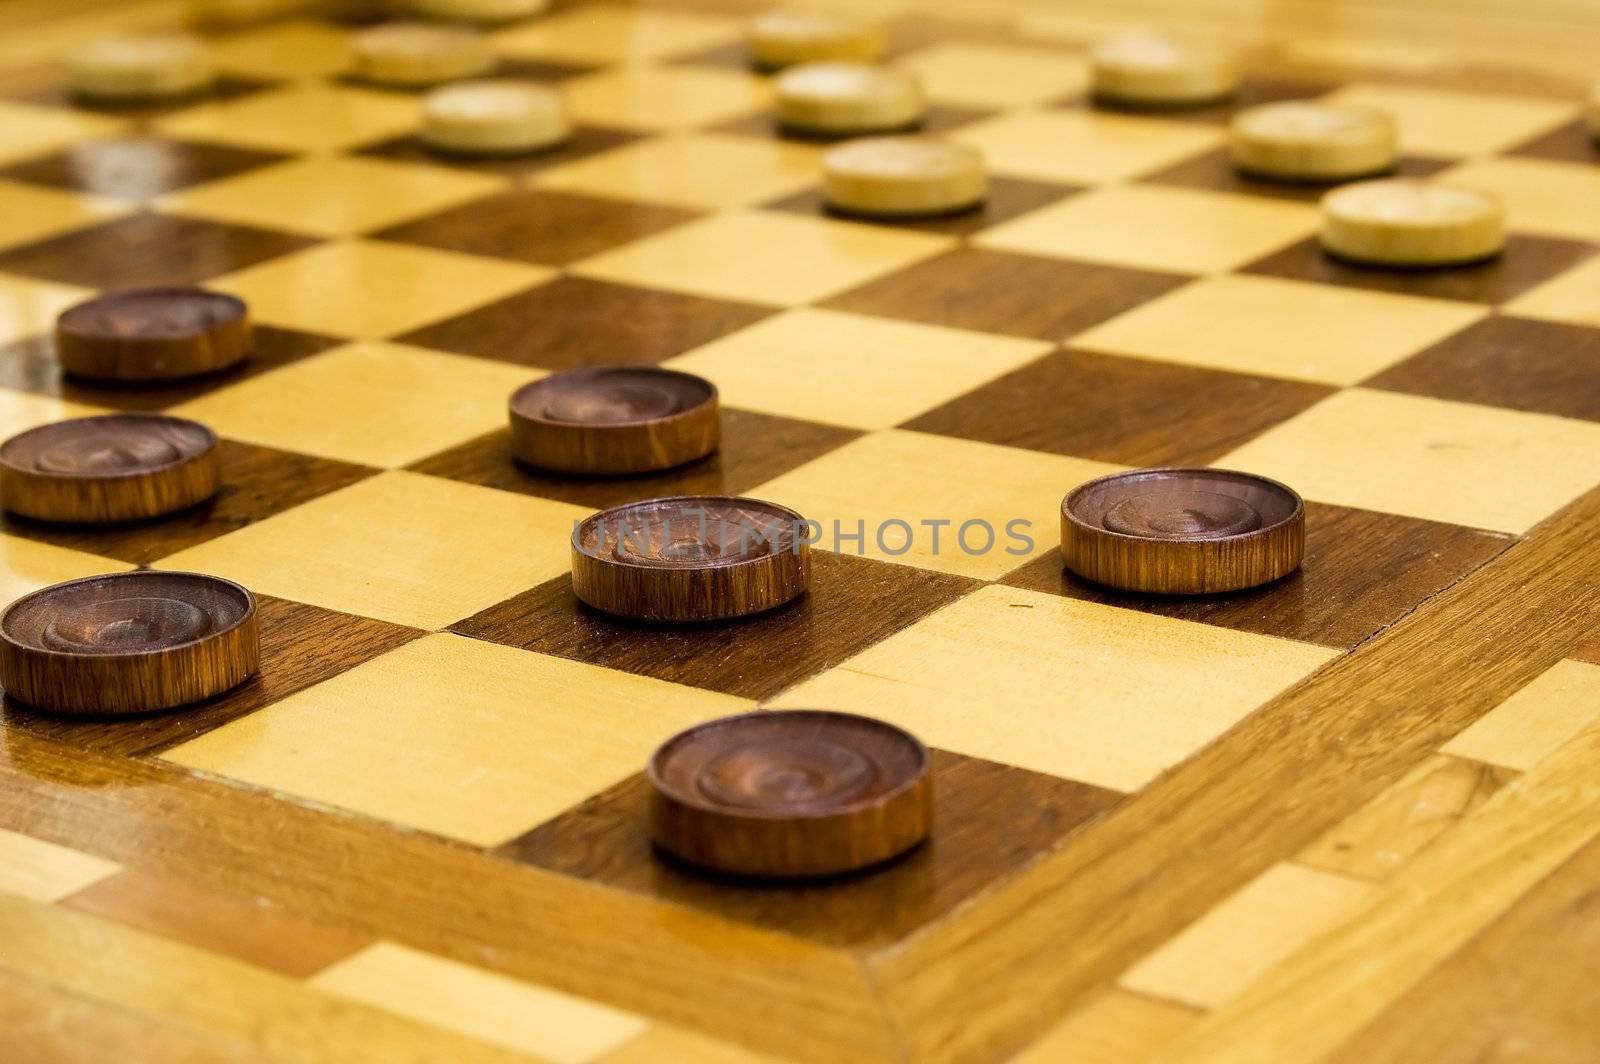 The game of the draughts